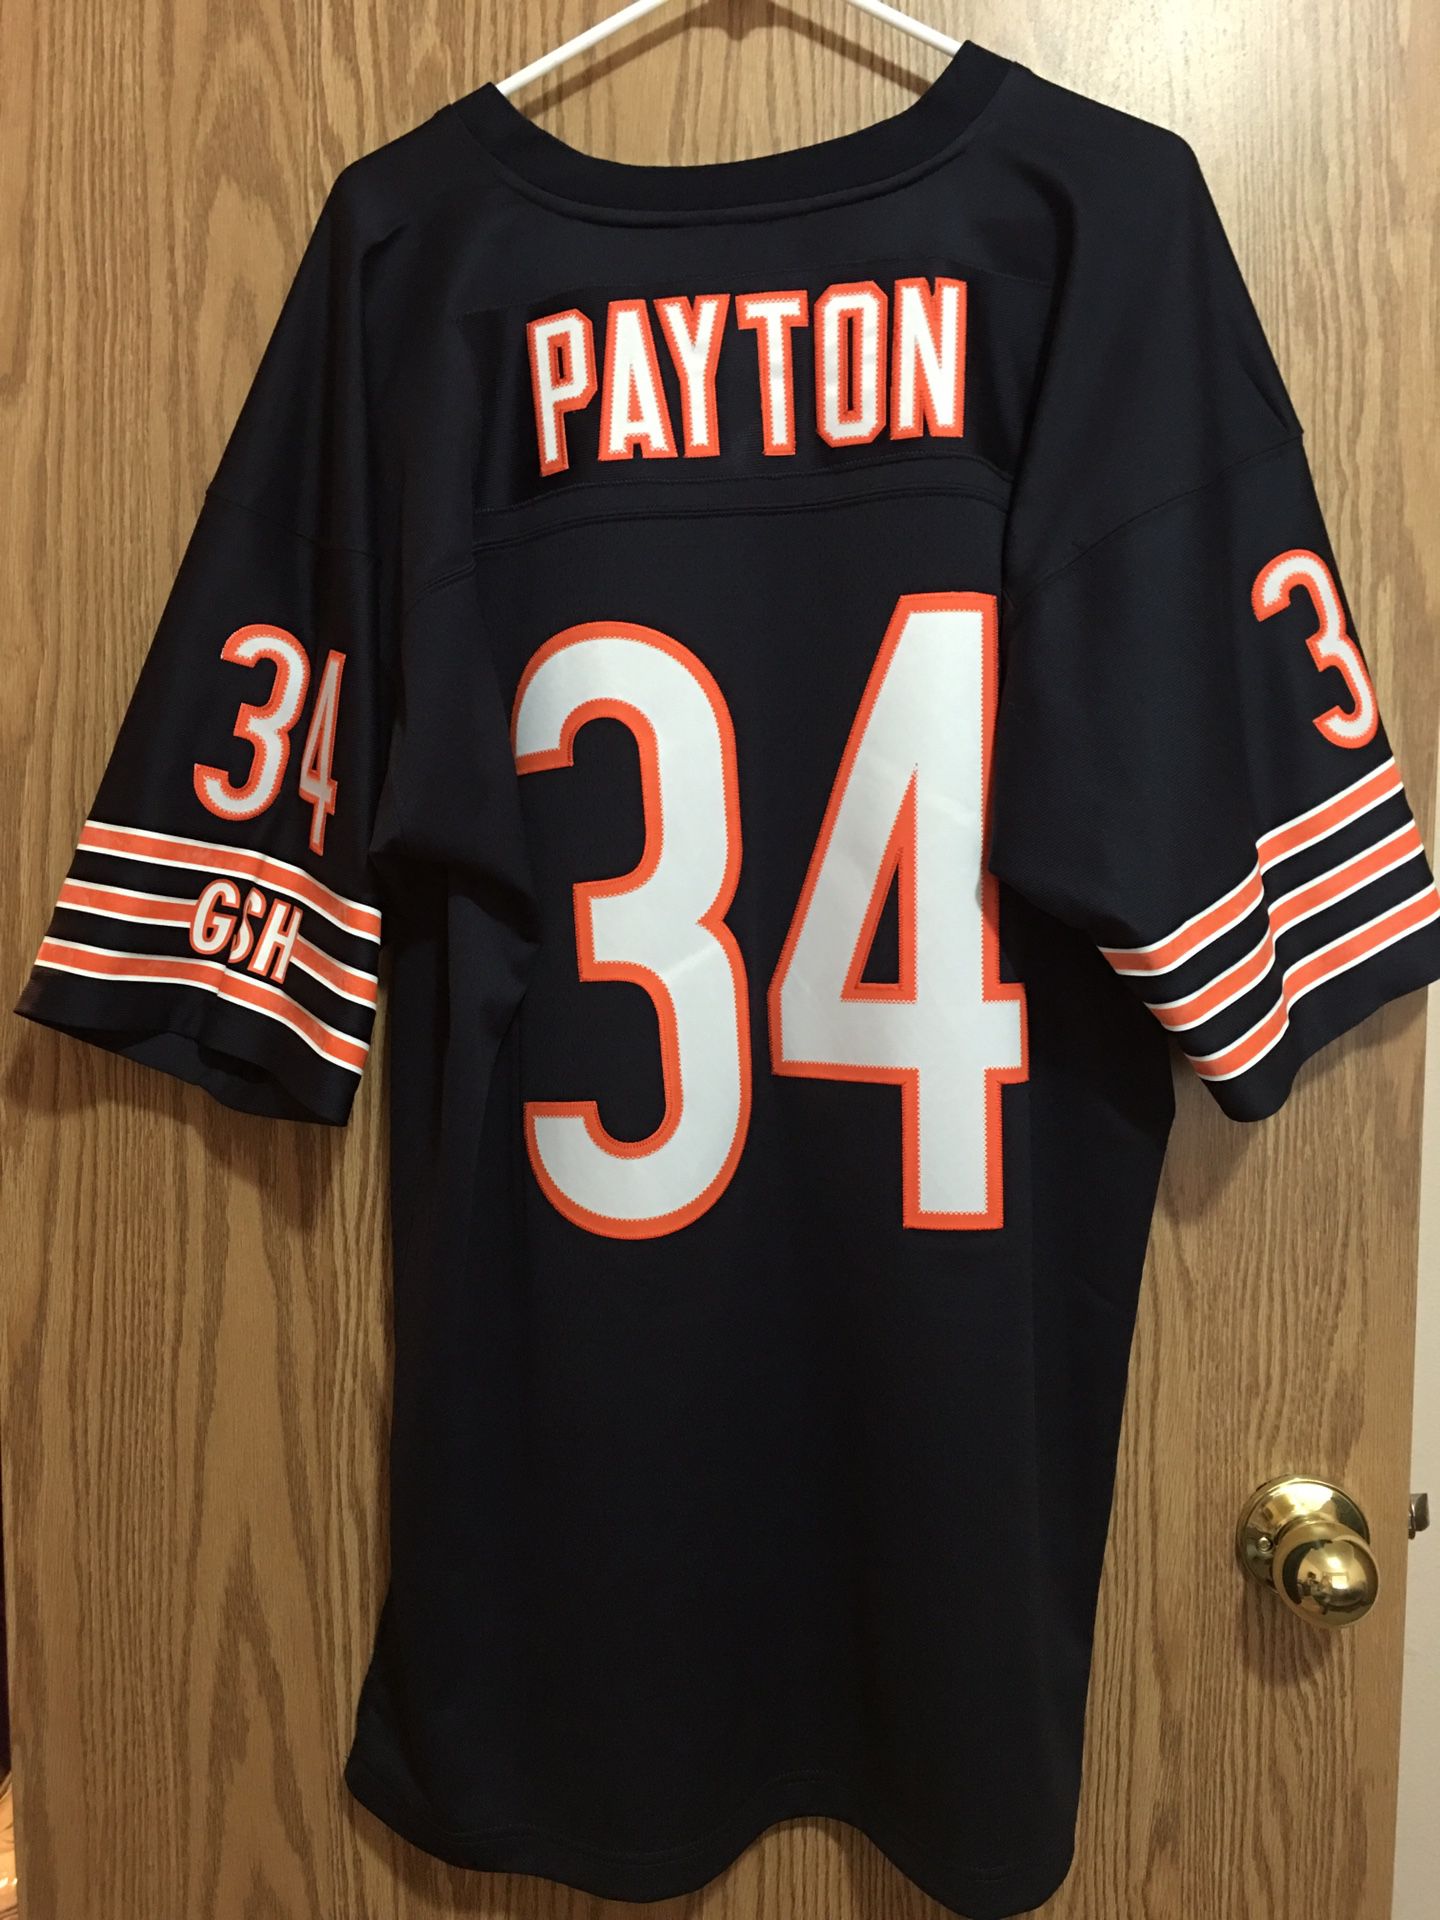 walter payton authentic jersey